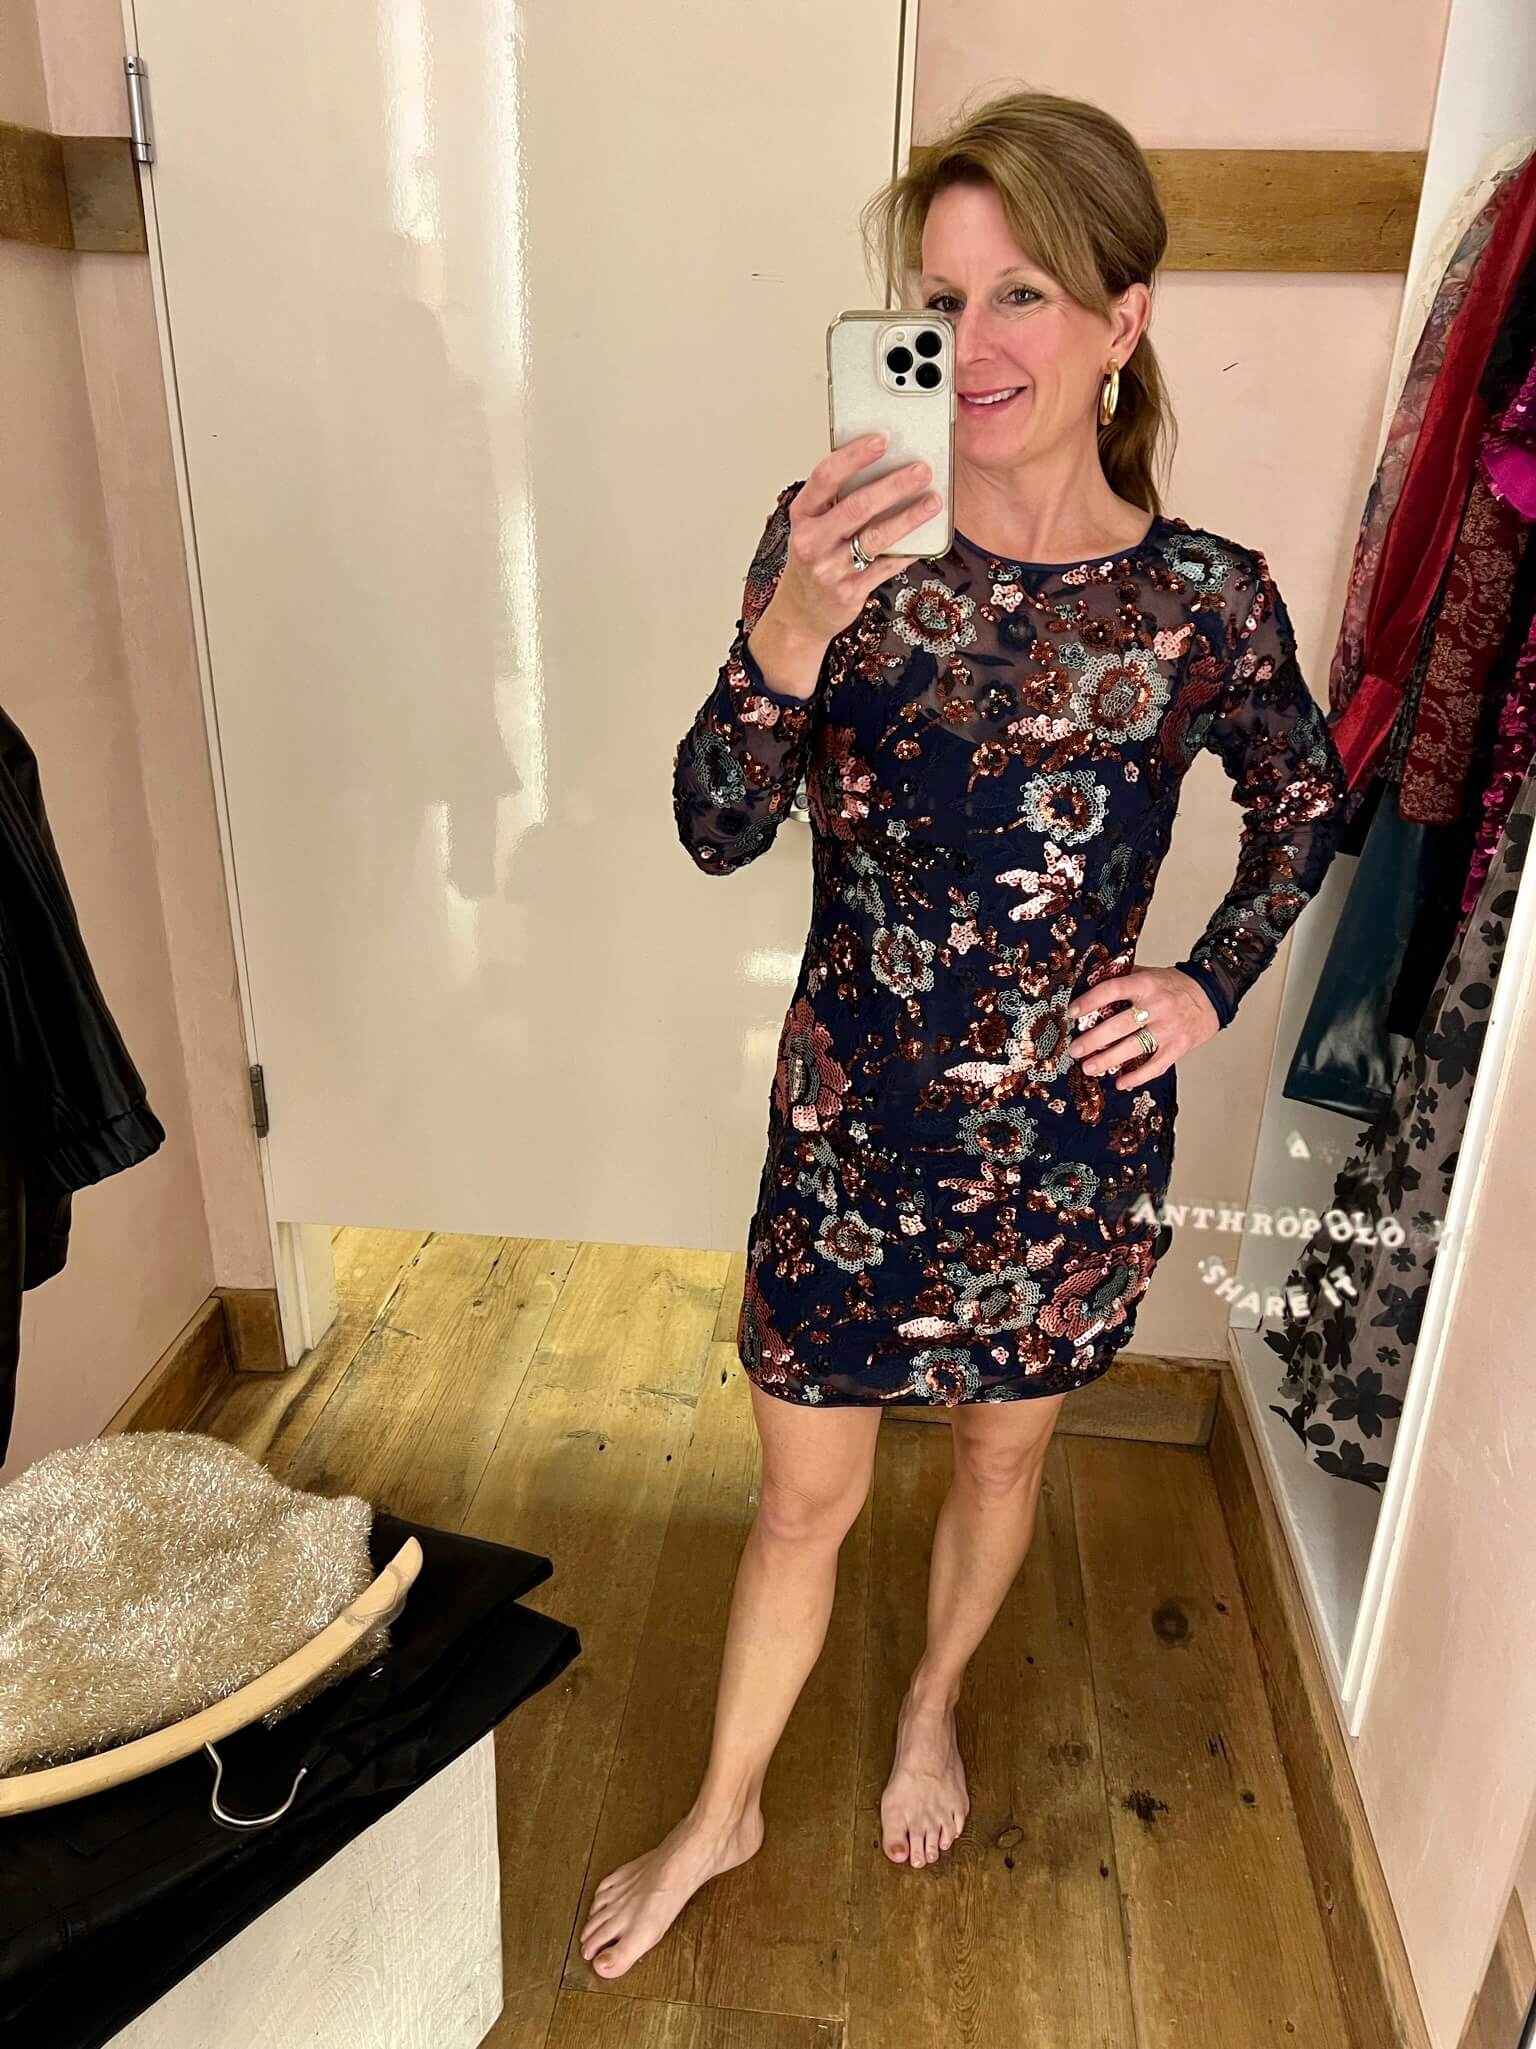 The Best Holiday Pieces At Anthropologie long sleeve sequin sheath dress how to wear sequins this holiday season Nashville personal stylists share favorite cocktail dresses for the holidays what to wear for New Years Eve